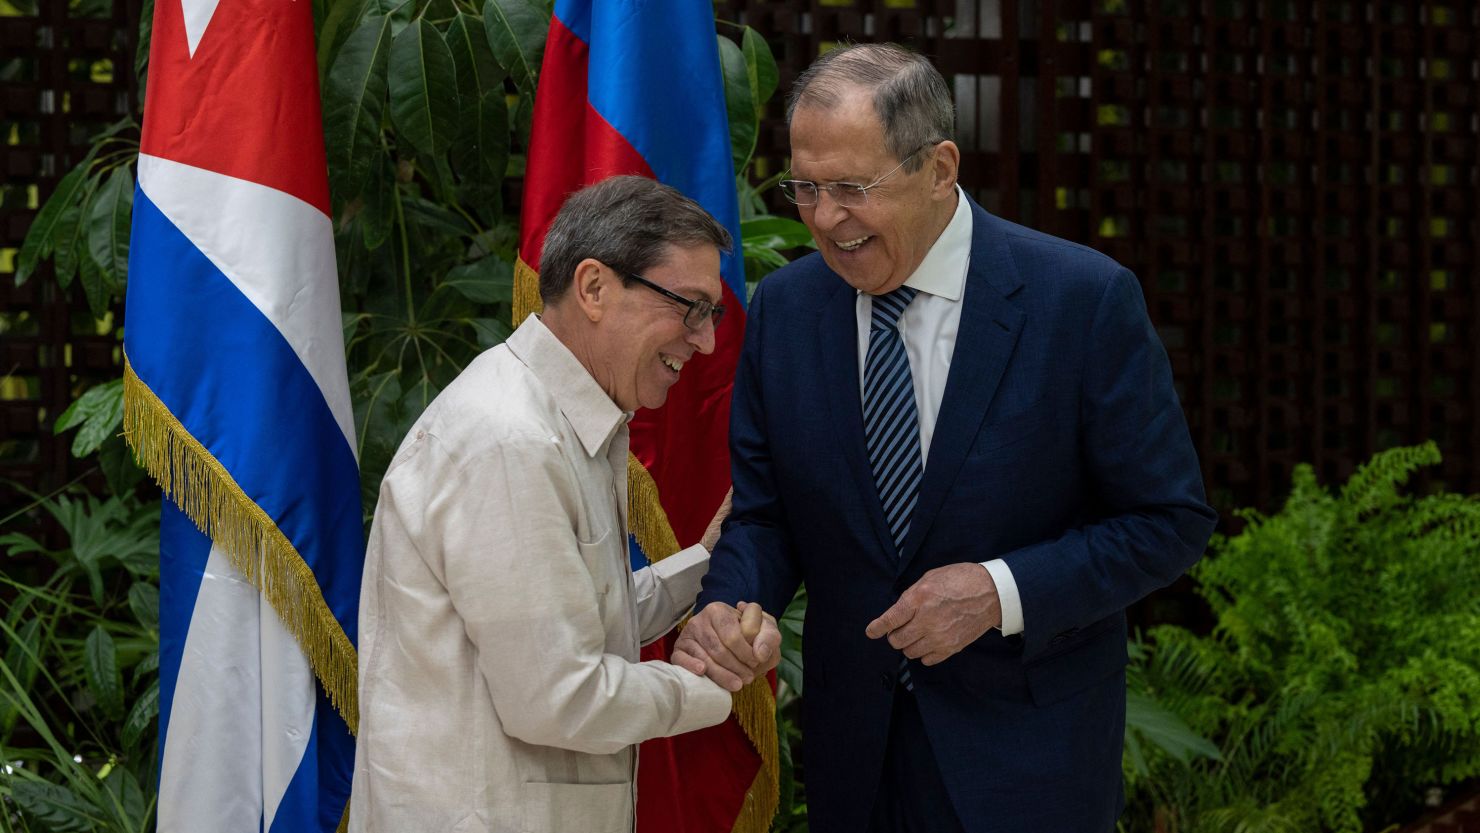 Russian Foreign Minister Sergey Lavrov (R) and Cuba's Minister of Foreign Affairs, Bruno Rodriguez, shake hands during a meeting in Havana on April 20, 2023. (Photo by Ramon Espinosa / POOL / AFP) (Photo by RAMON ESPINOSA/POOL/AFP via Getty Images)